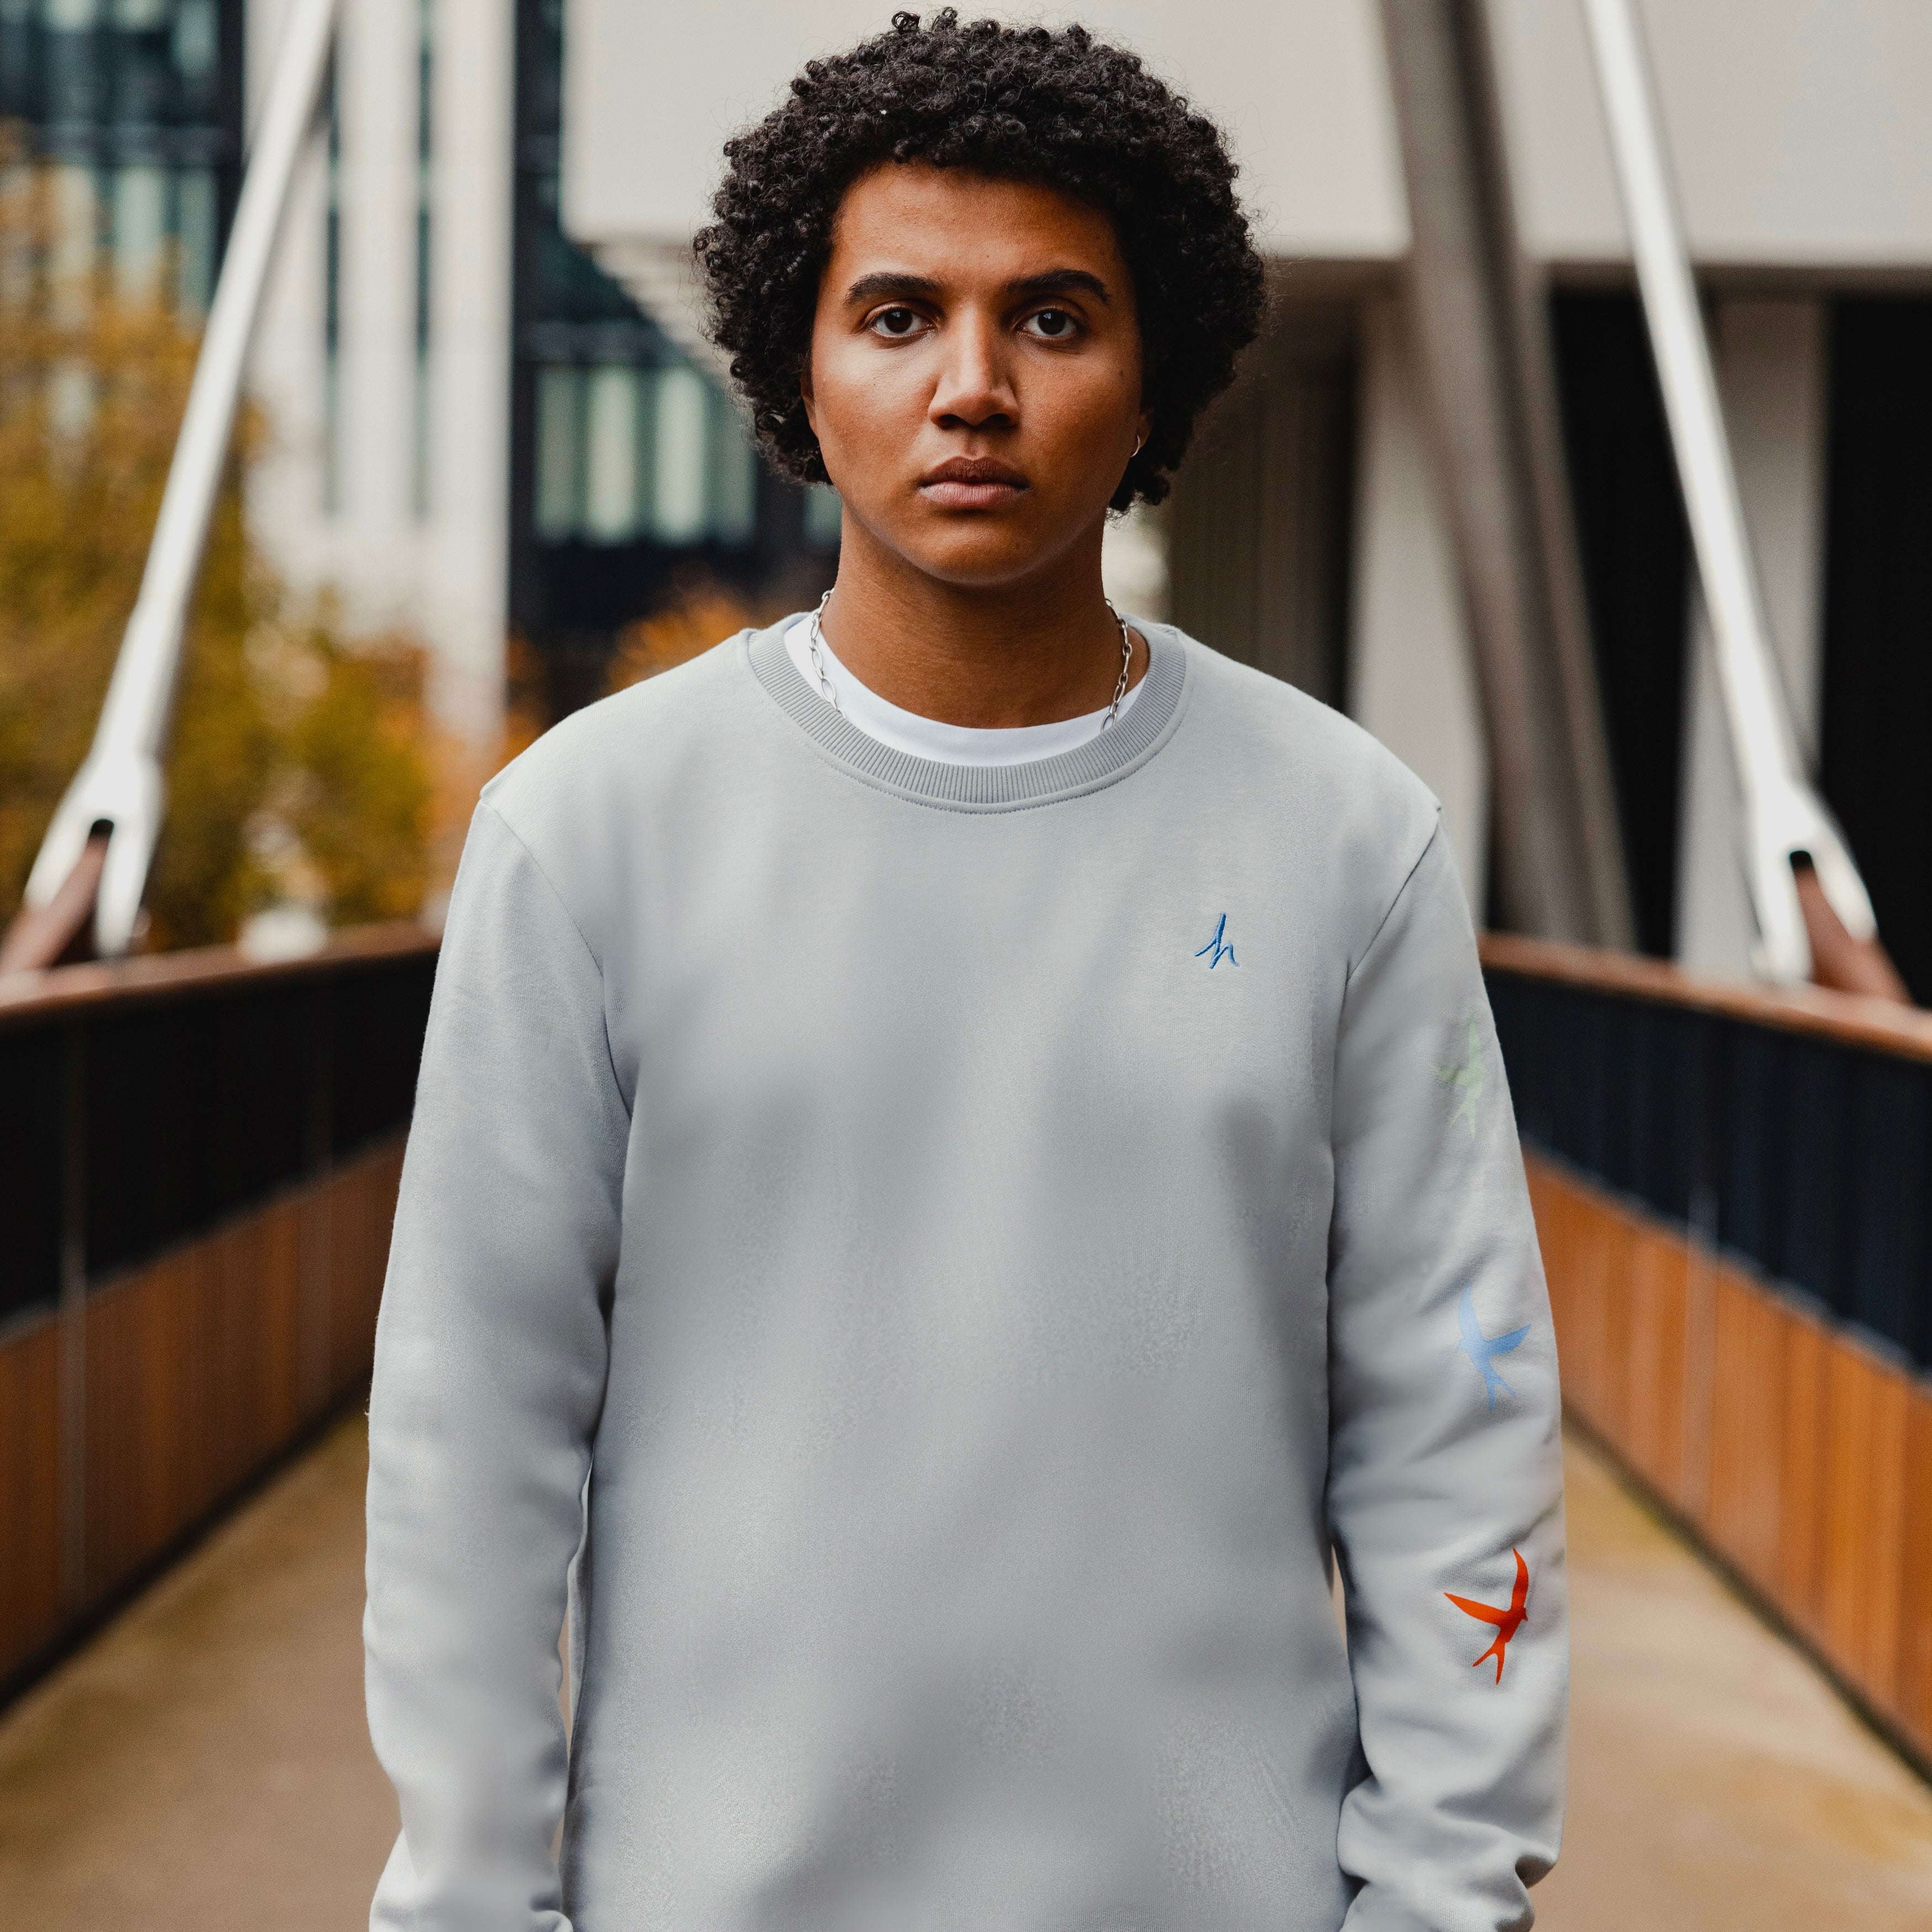 h clothing - male model facing the camera wearing heather grey sweatshirt with colourful birds on left arm